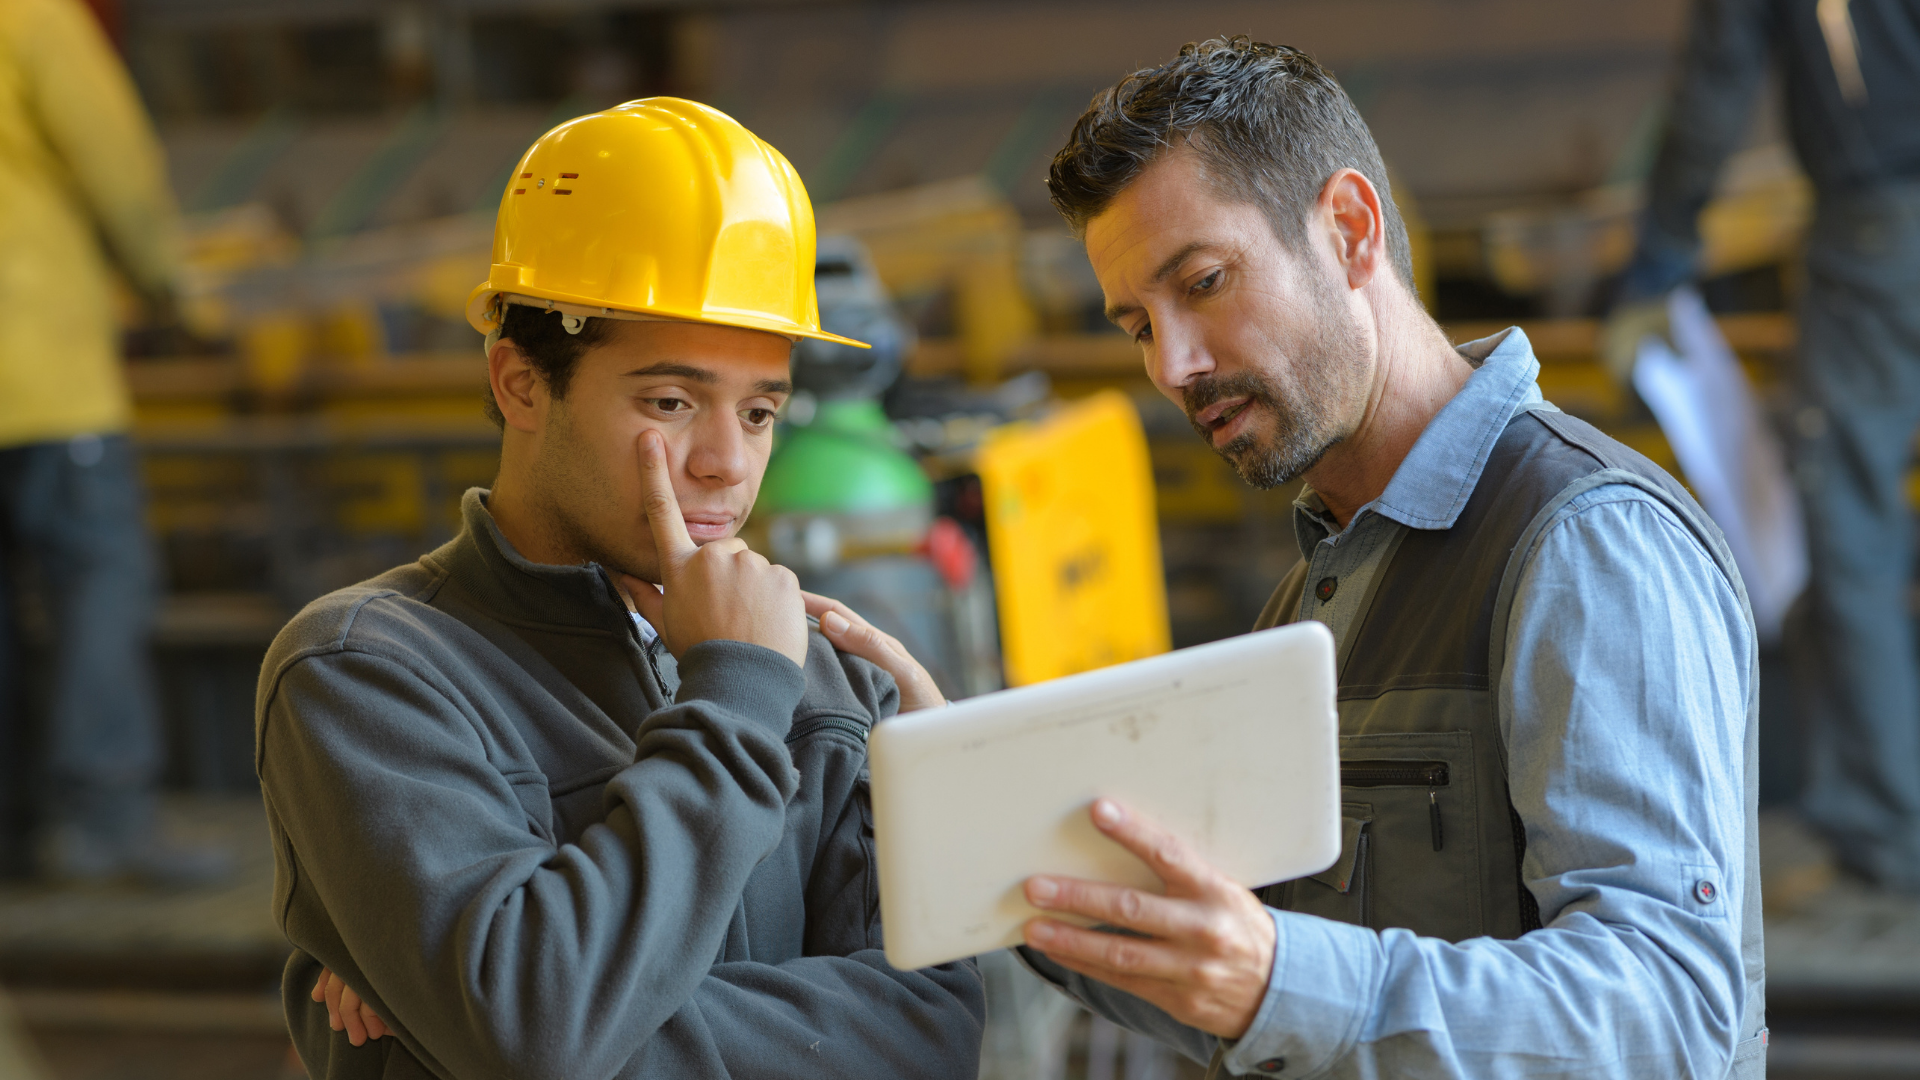 Two construction workers viewing information on a tablet